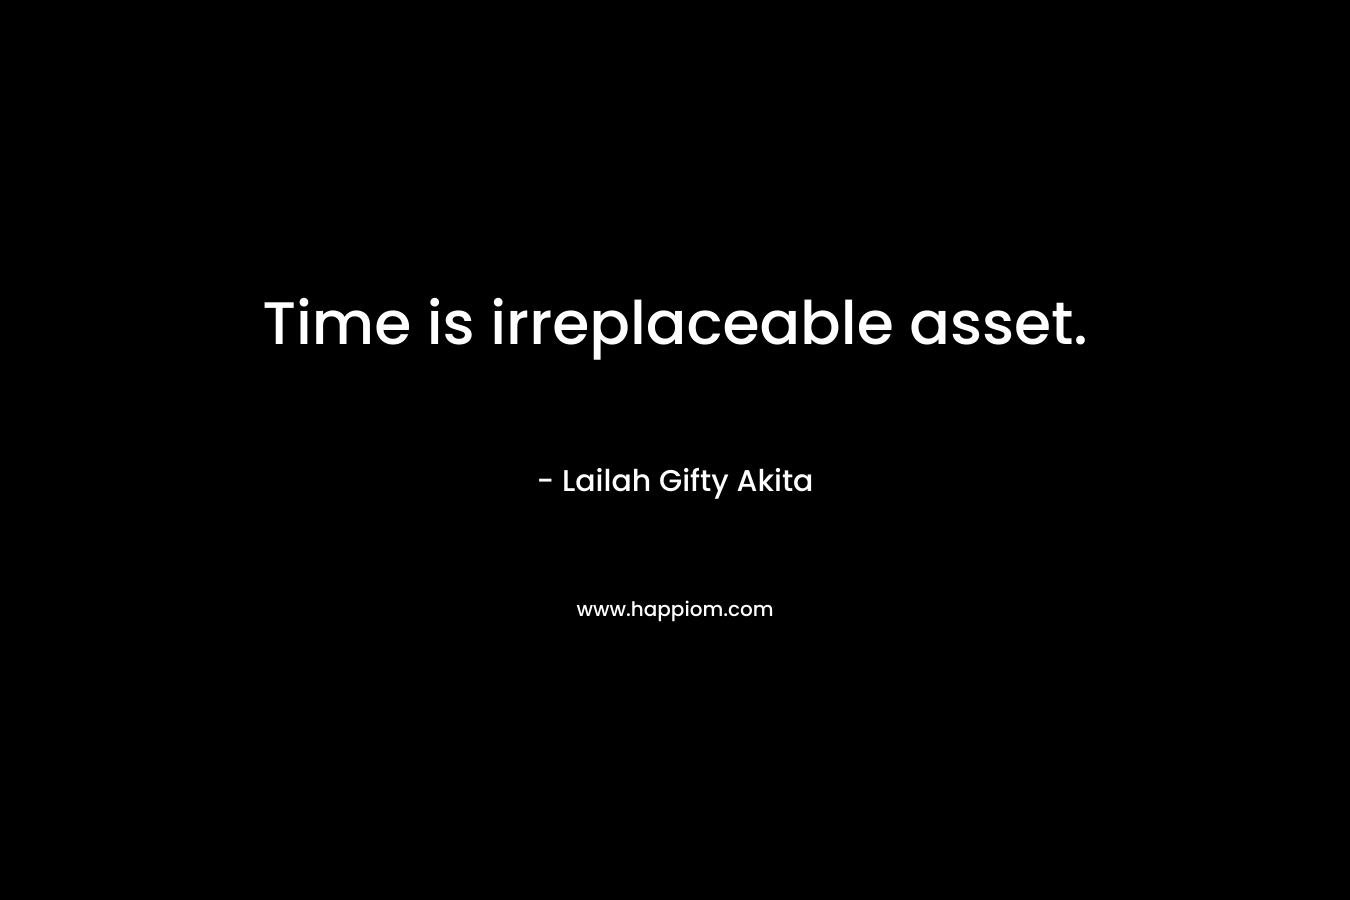 Time is irreplaceable asset.